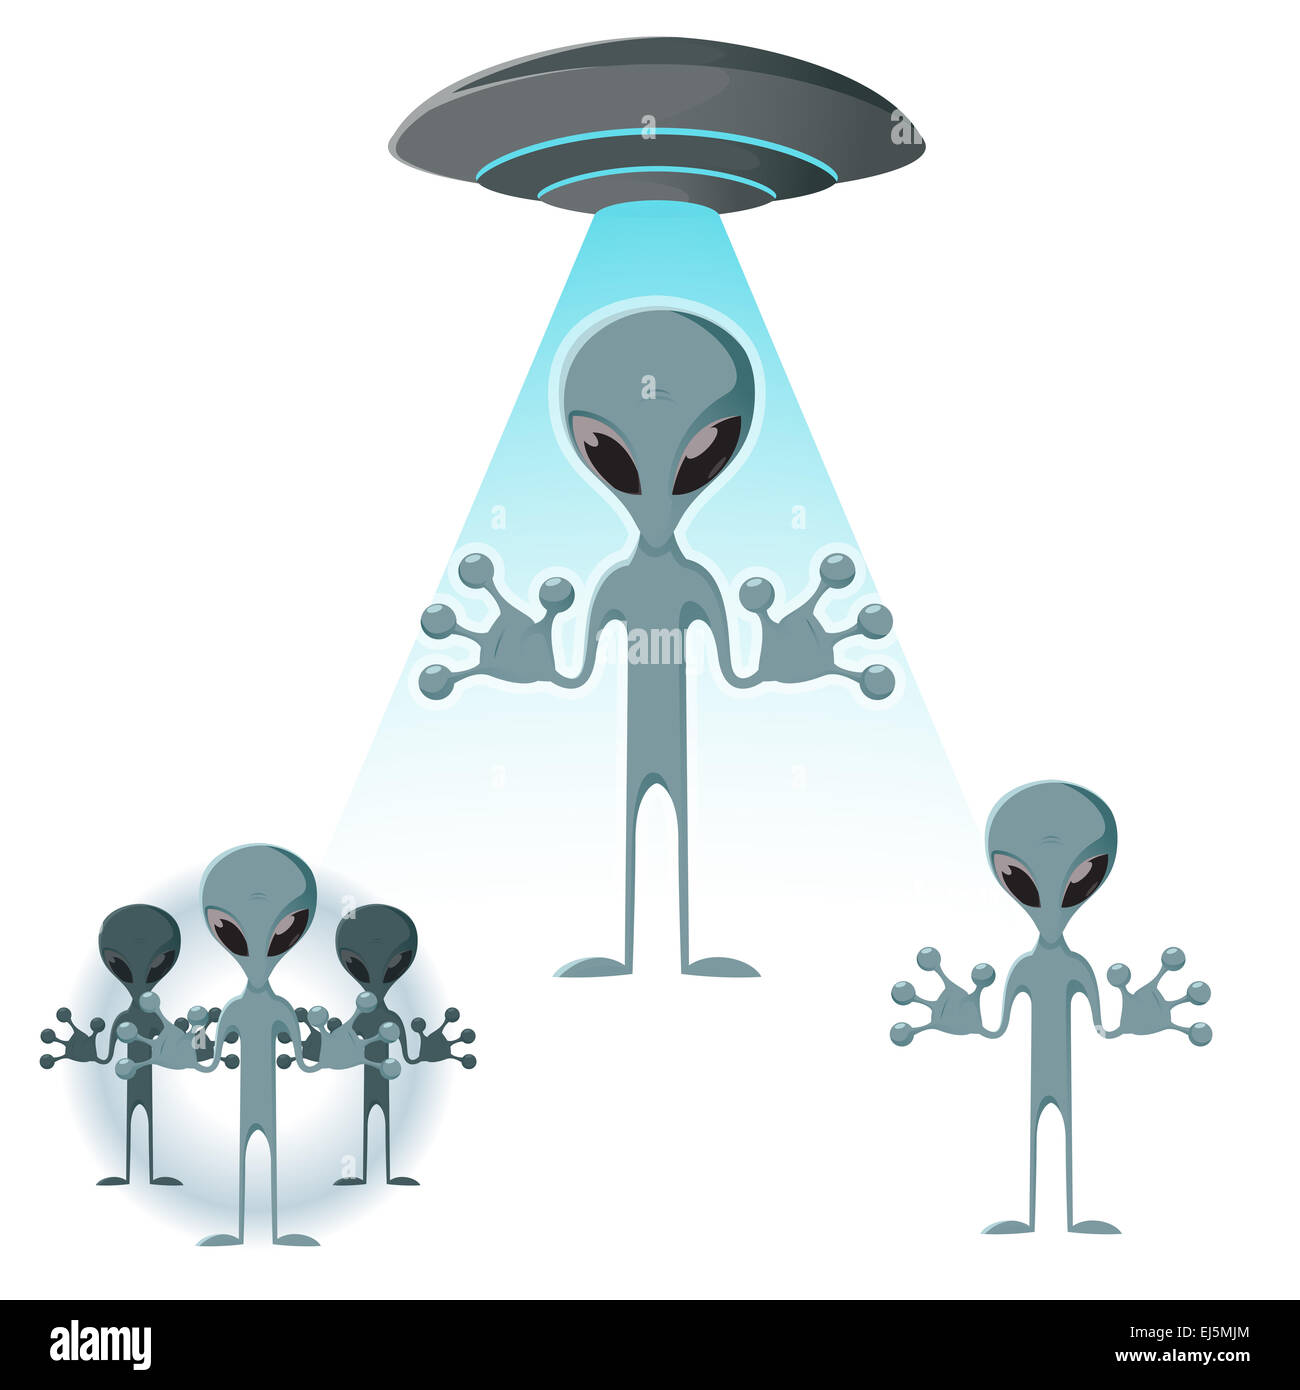 Vector image of some cartoon alien icons Stock Photo